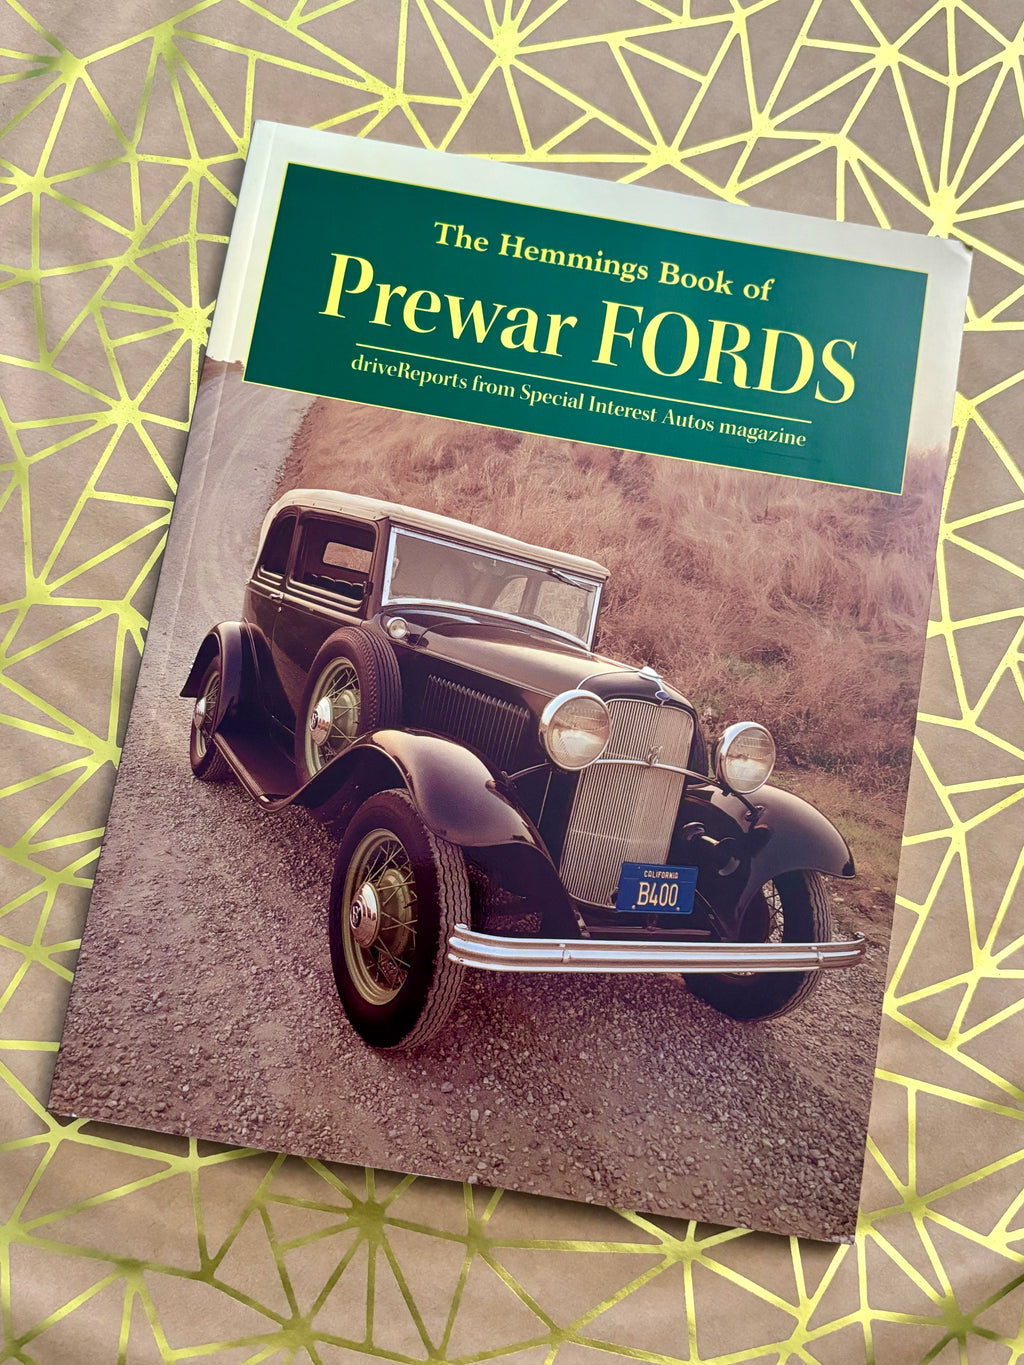 The Hemmings Book of Prewar Fords: DriveReports from Special Interest Autos Magazine